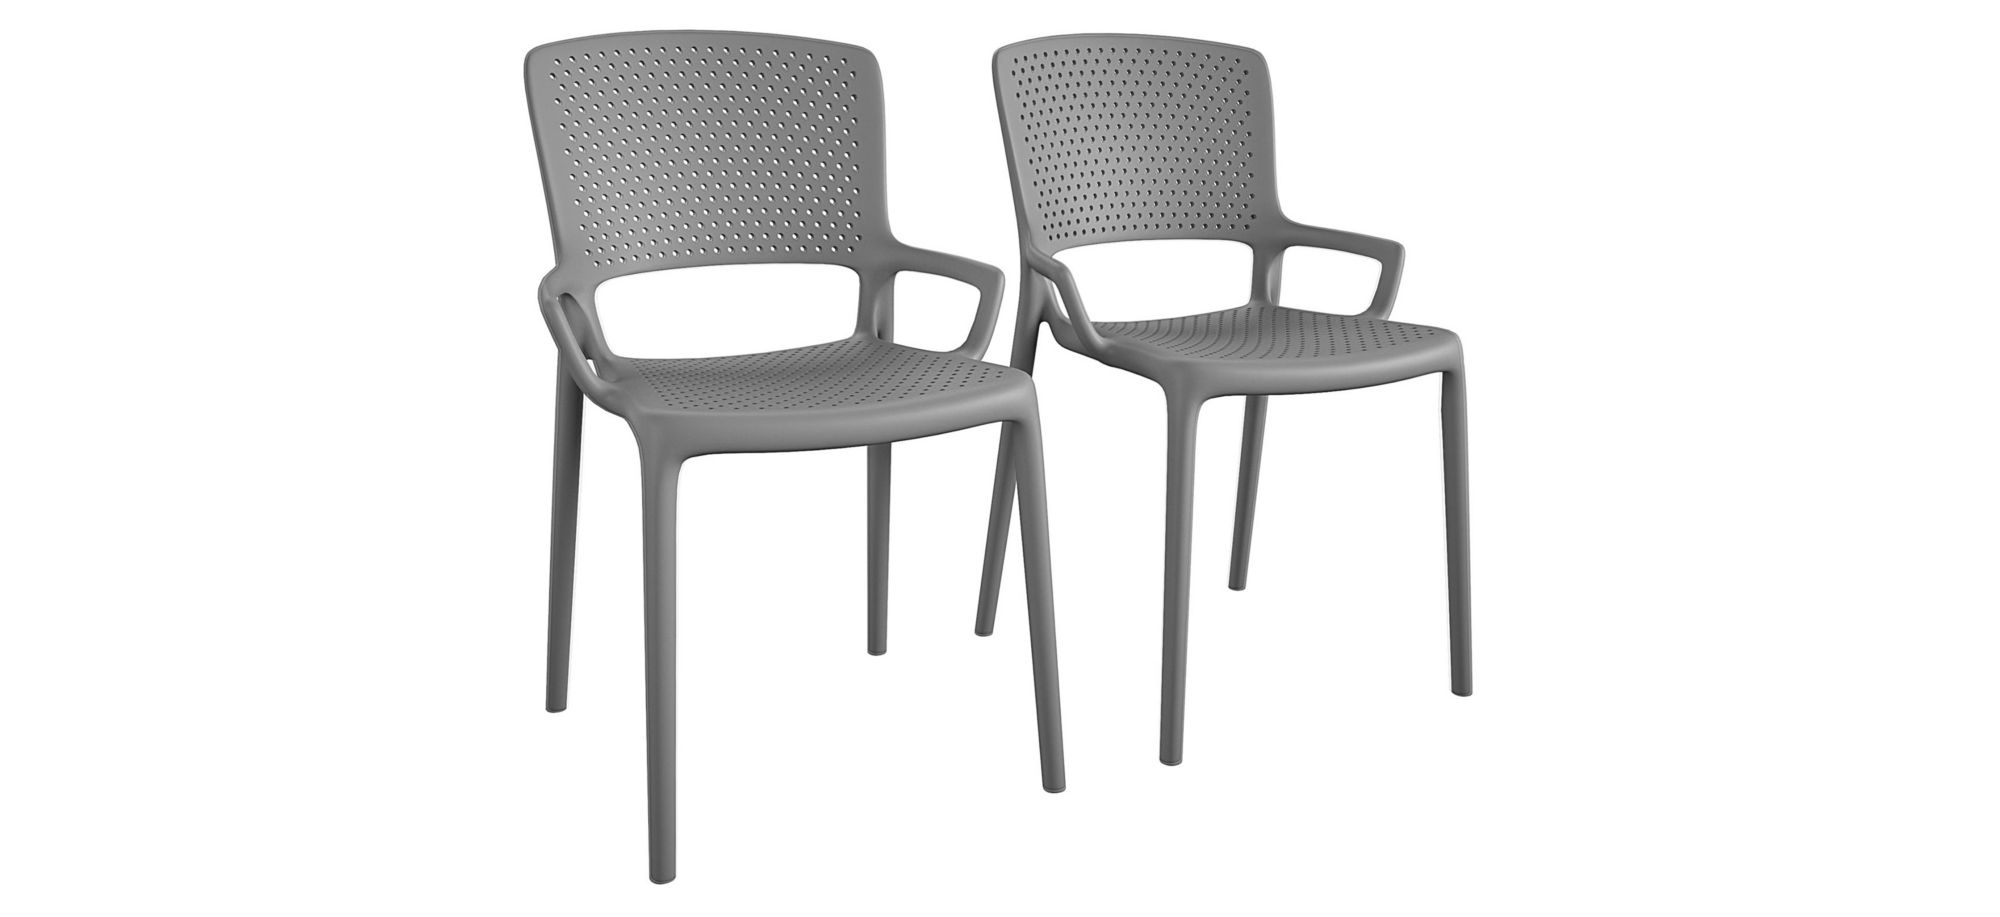 COSCO Outdoor Stacking Resin Chair - Set of 2 in Fog Gray by DOREL HOME FURNISHINGS